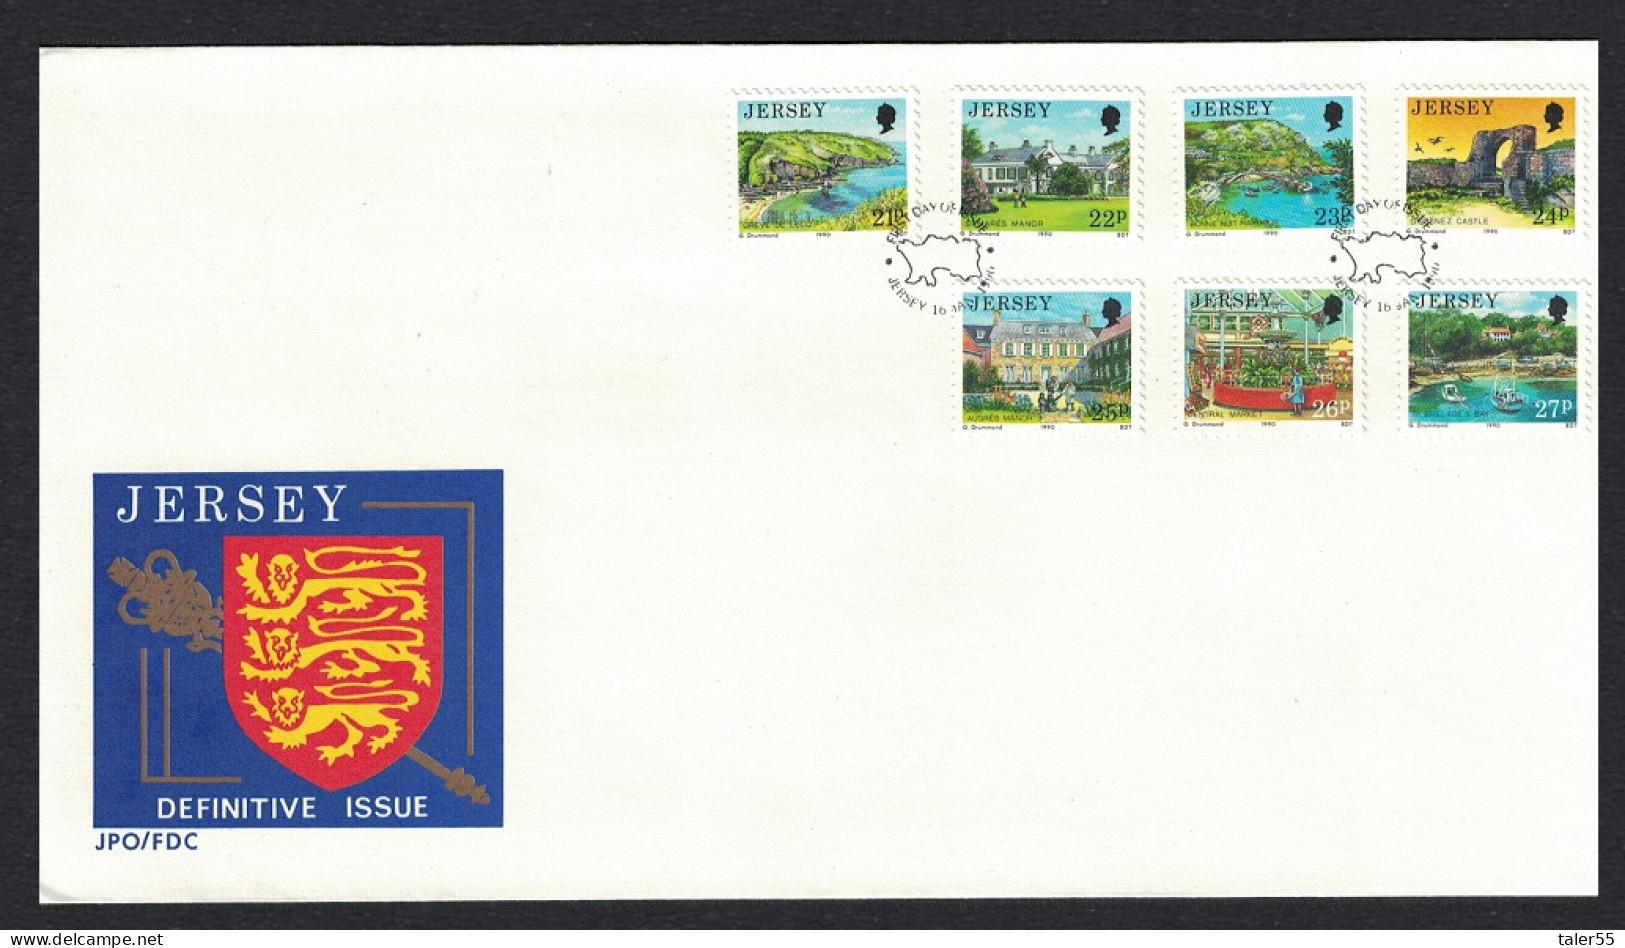 Jersey Scenes Definitives FDC 1990 SG#481-487 - Jersey